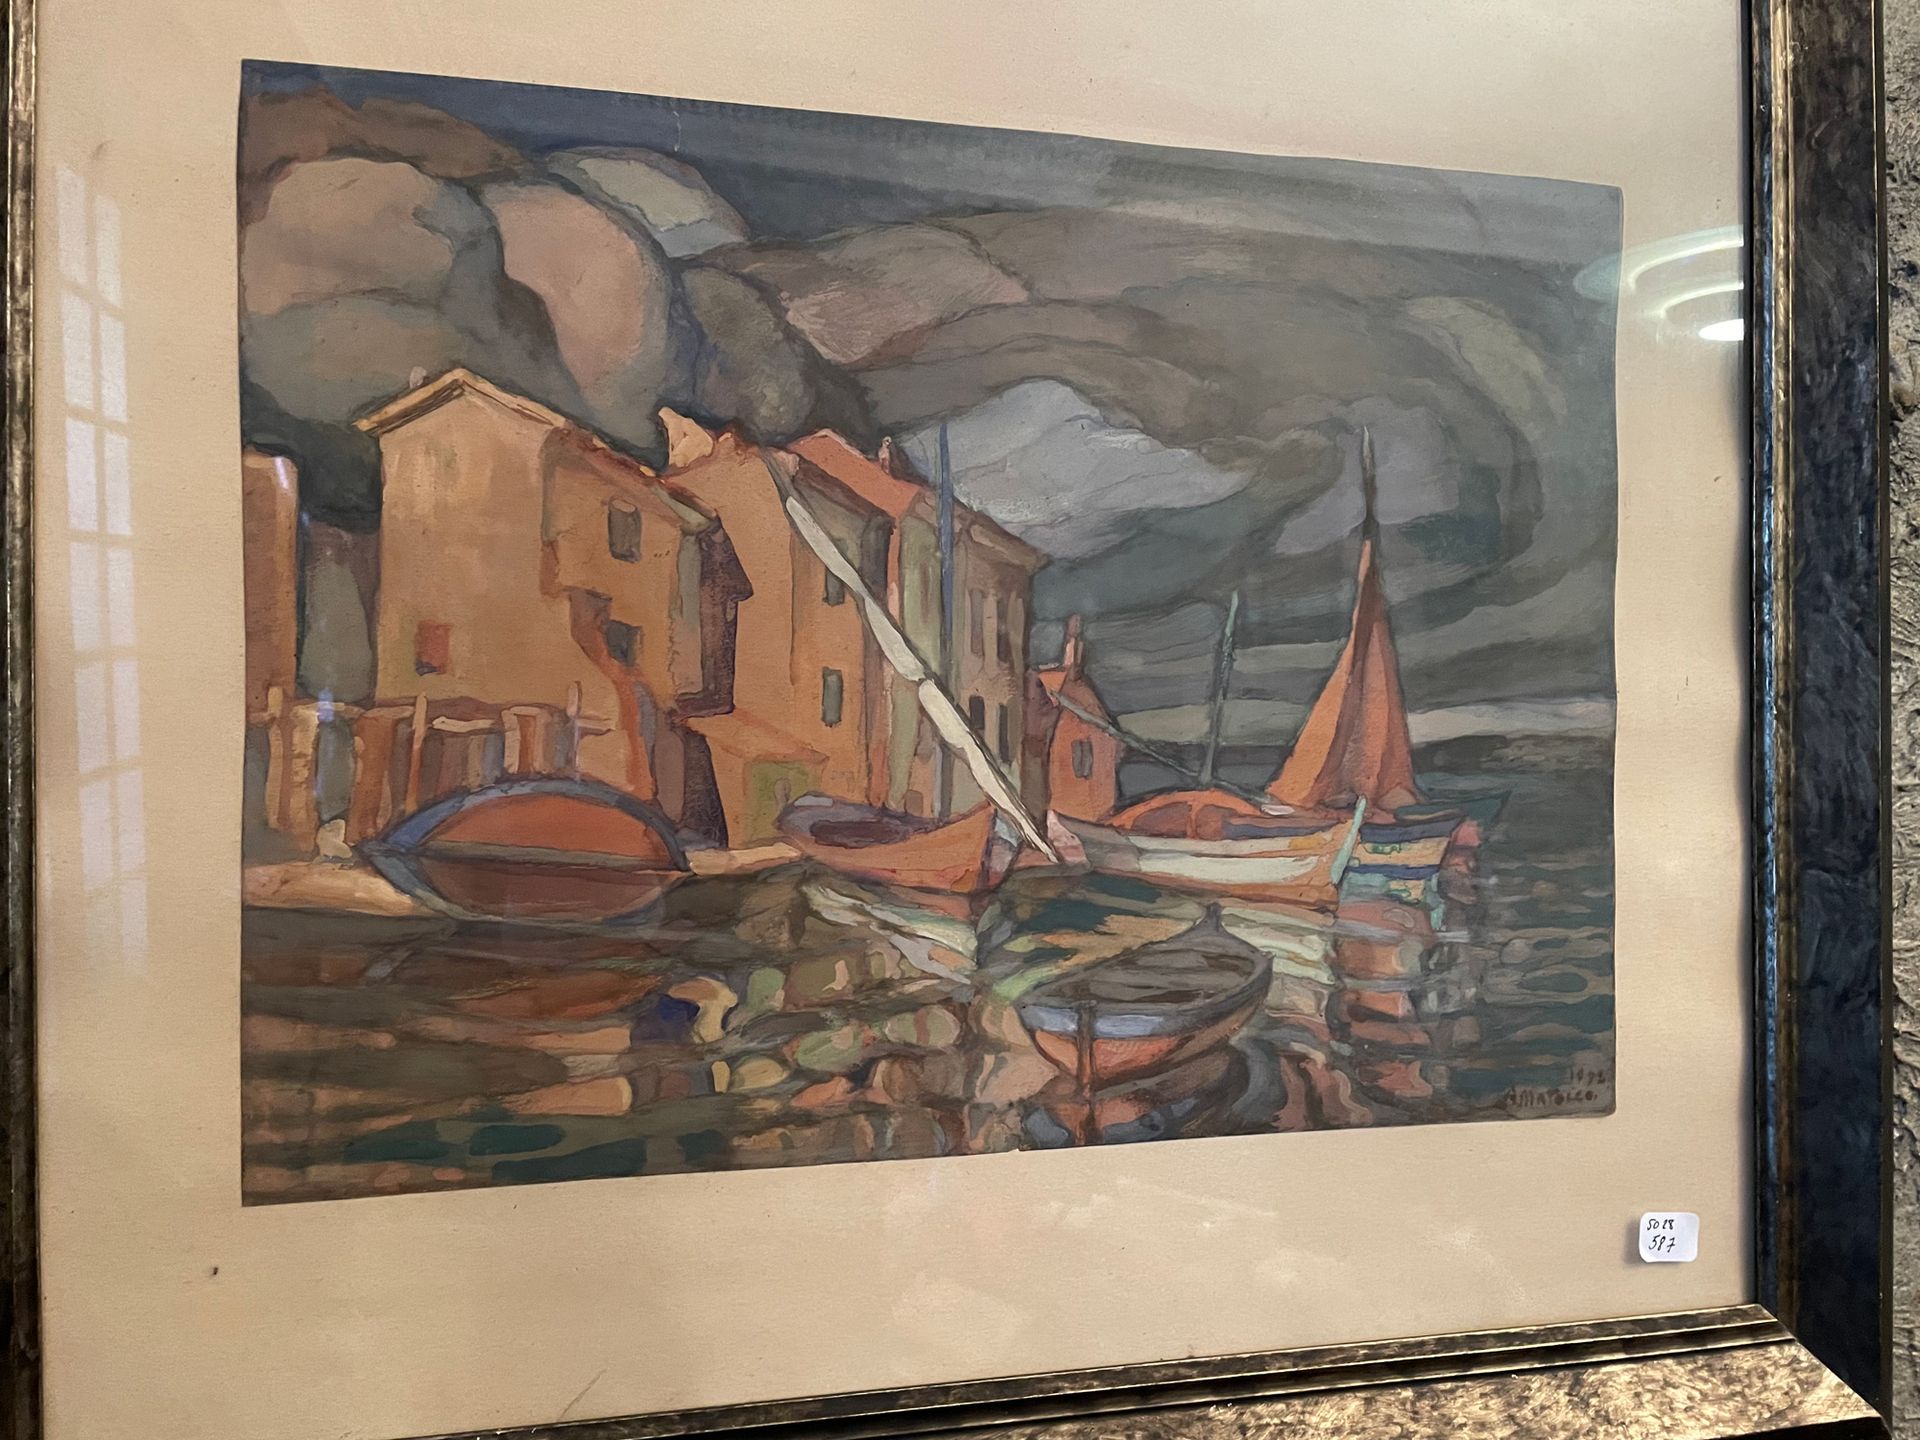 Ecole Moderne "Fisherman's Boats".
Watercolor on paper signed and dated lower ri&hellip;